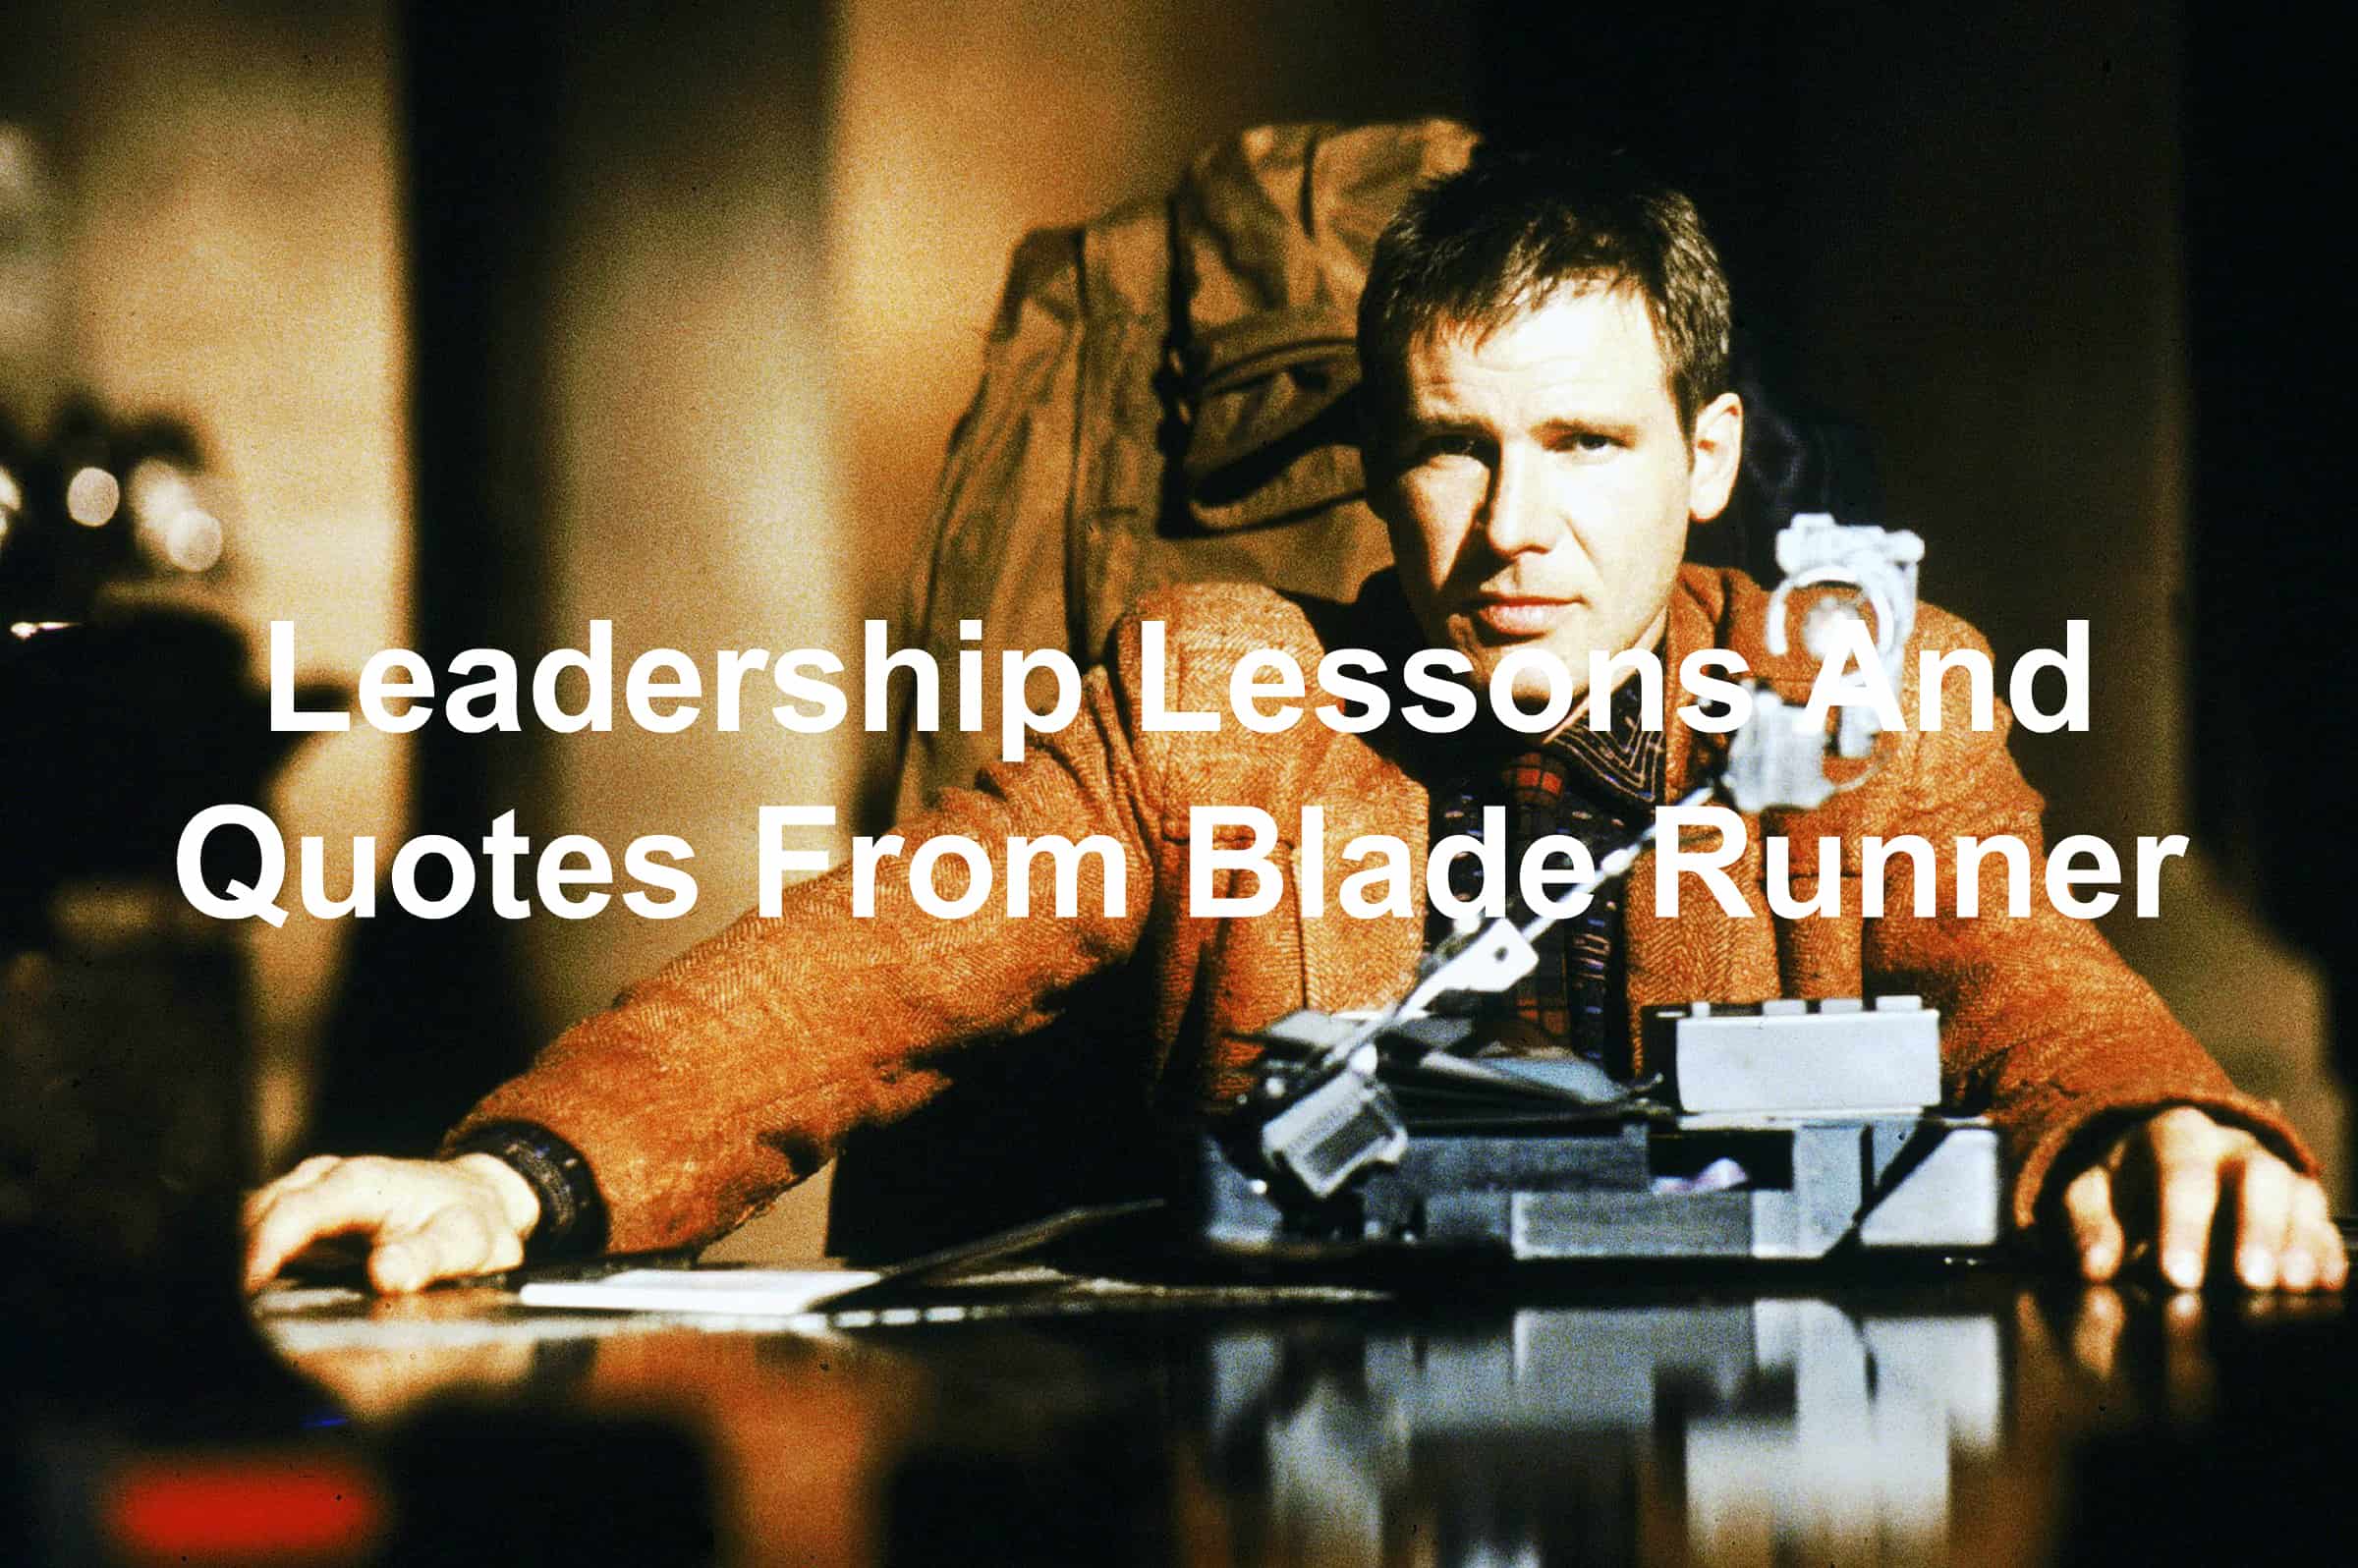 quotes and leadership lessons from Blade Runner